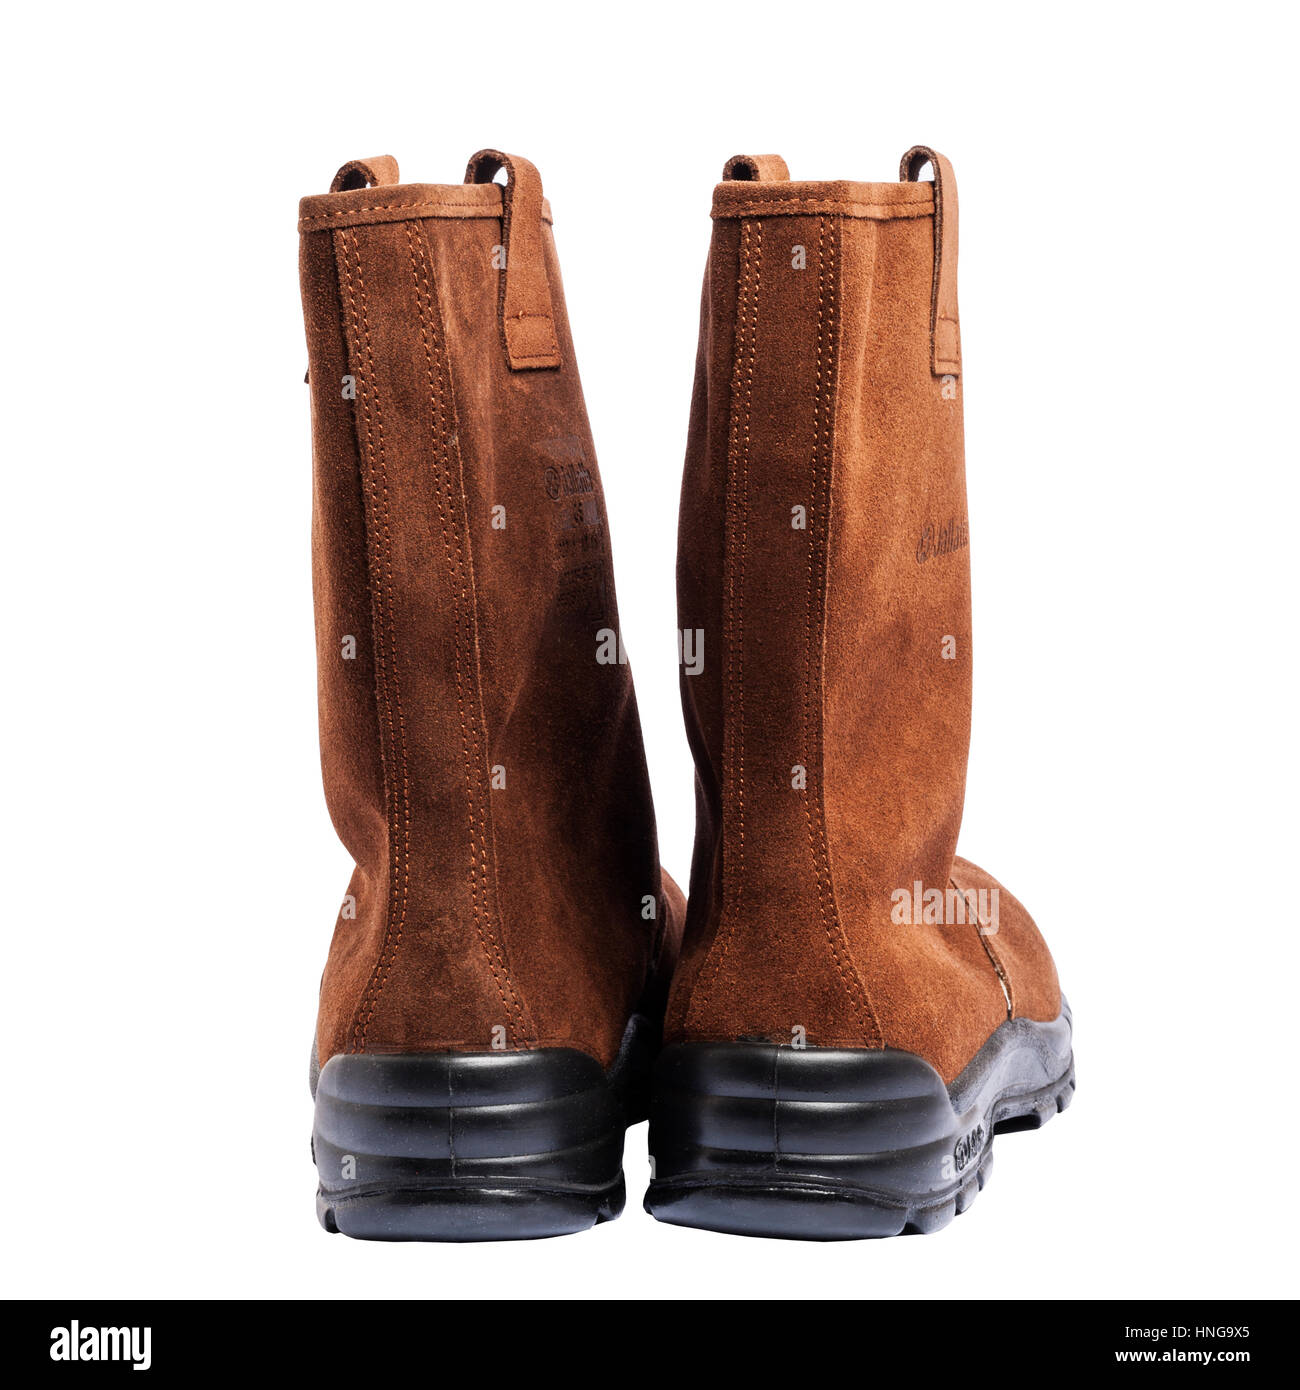 A pair of steel toe capped Jallette work rigger boots on a white background Stock Photo